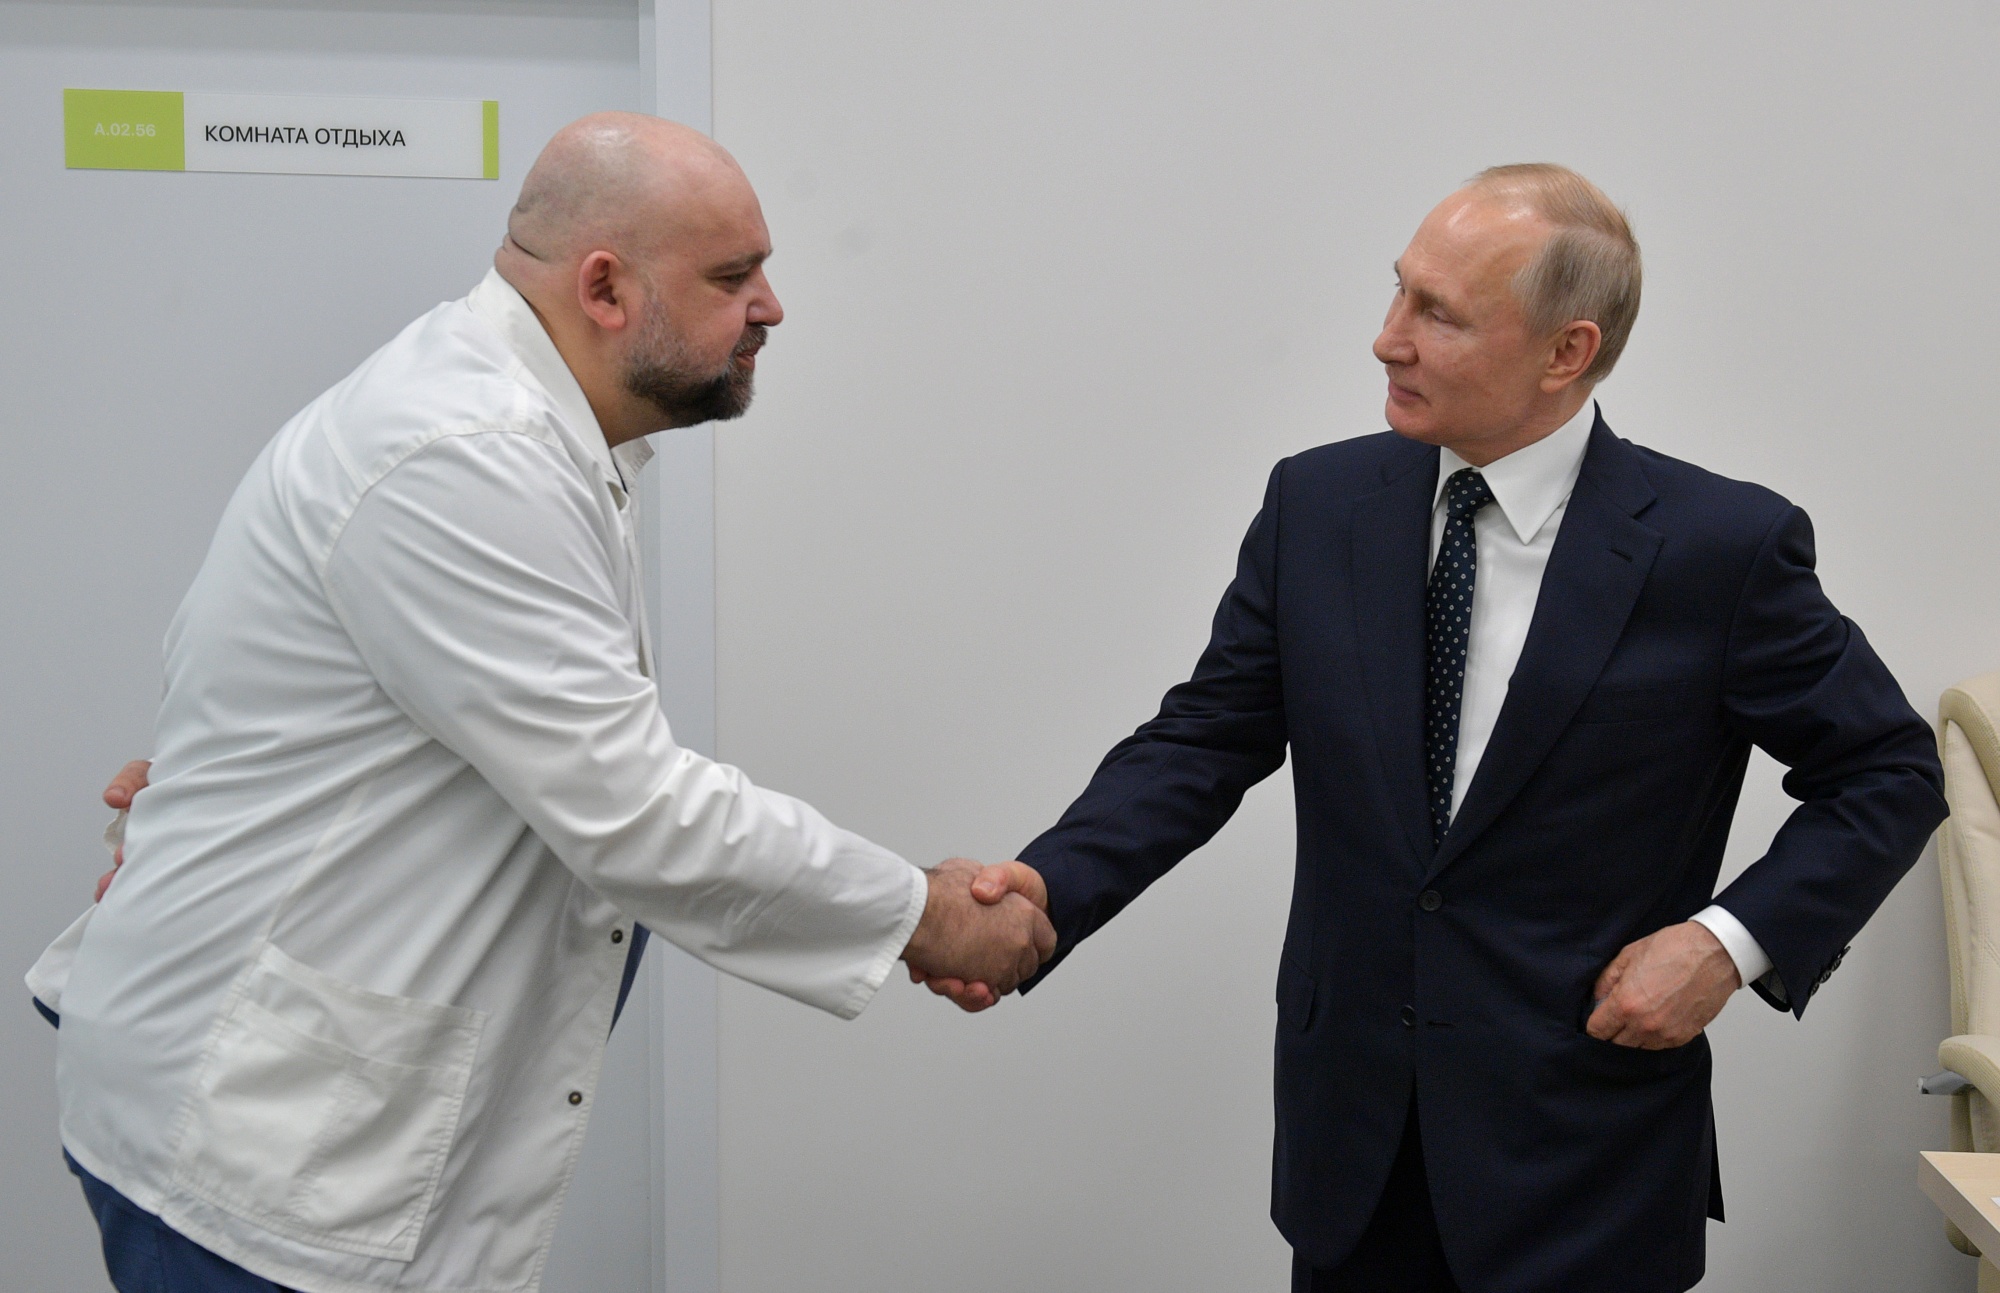 Vladimir Putin shakes hands with Denis Protsenko on his visit to the Novomoskovsky medical center, in Moscow, on March 24.